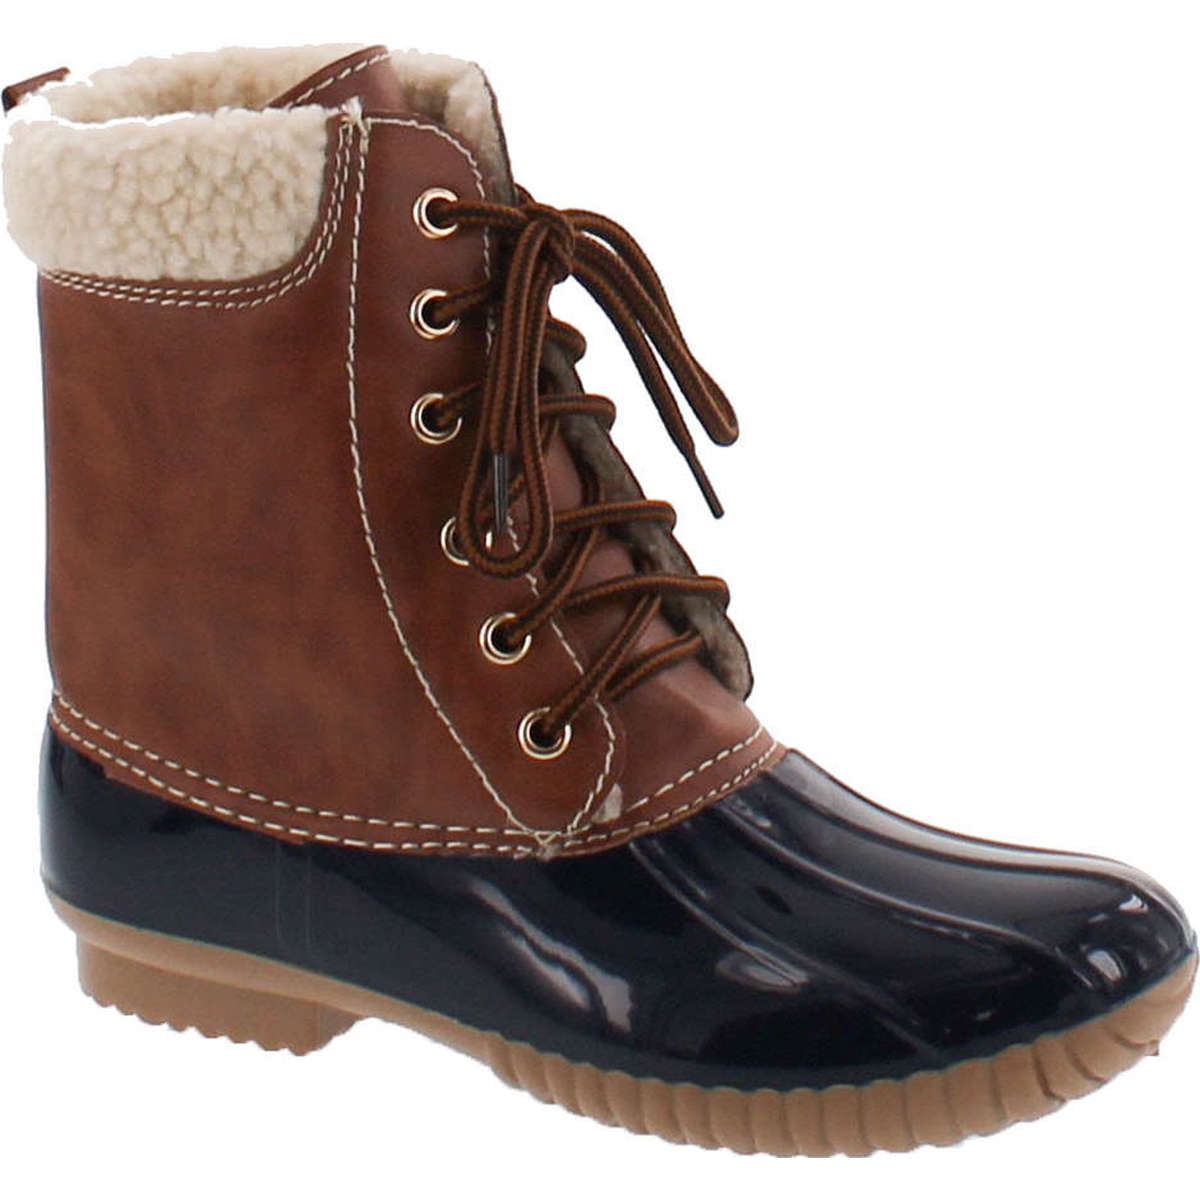 Two Tone Lace Up Ankle Rain Duck Boots 